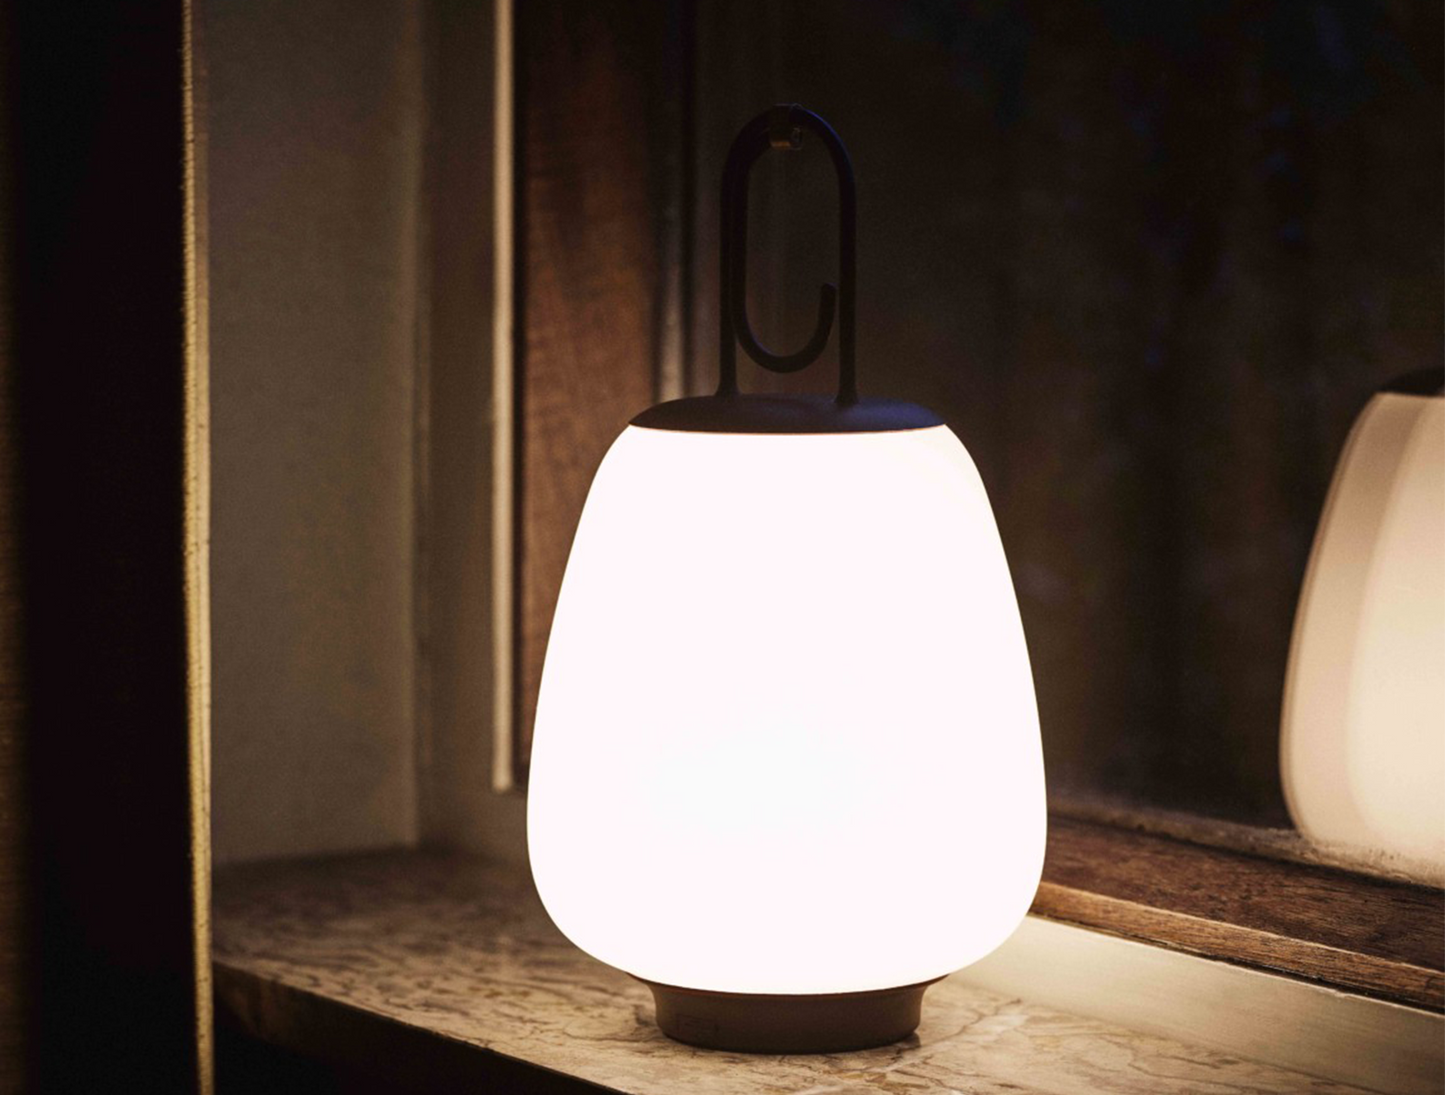 An illuminated Lucca Lamp SC51 in a dark room against the backdrop of a mirror